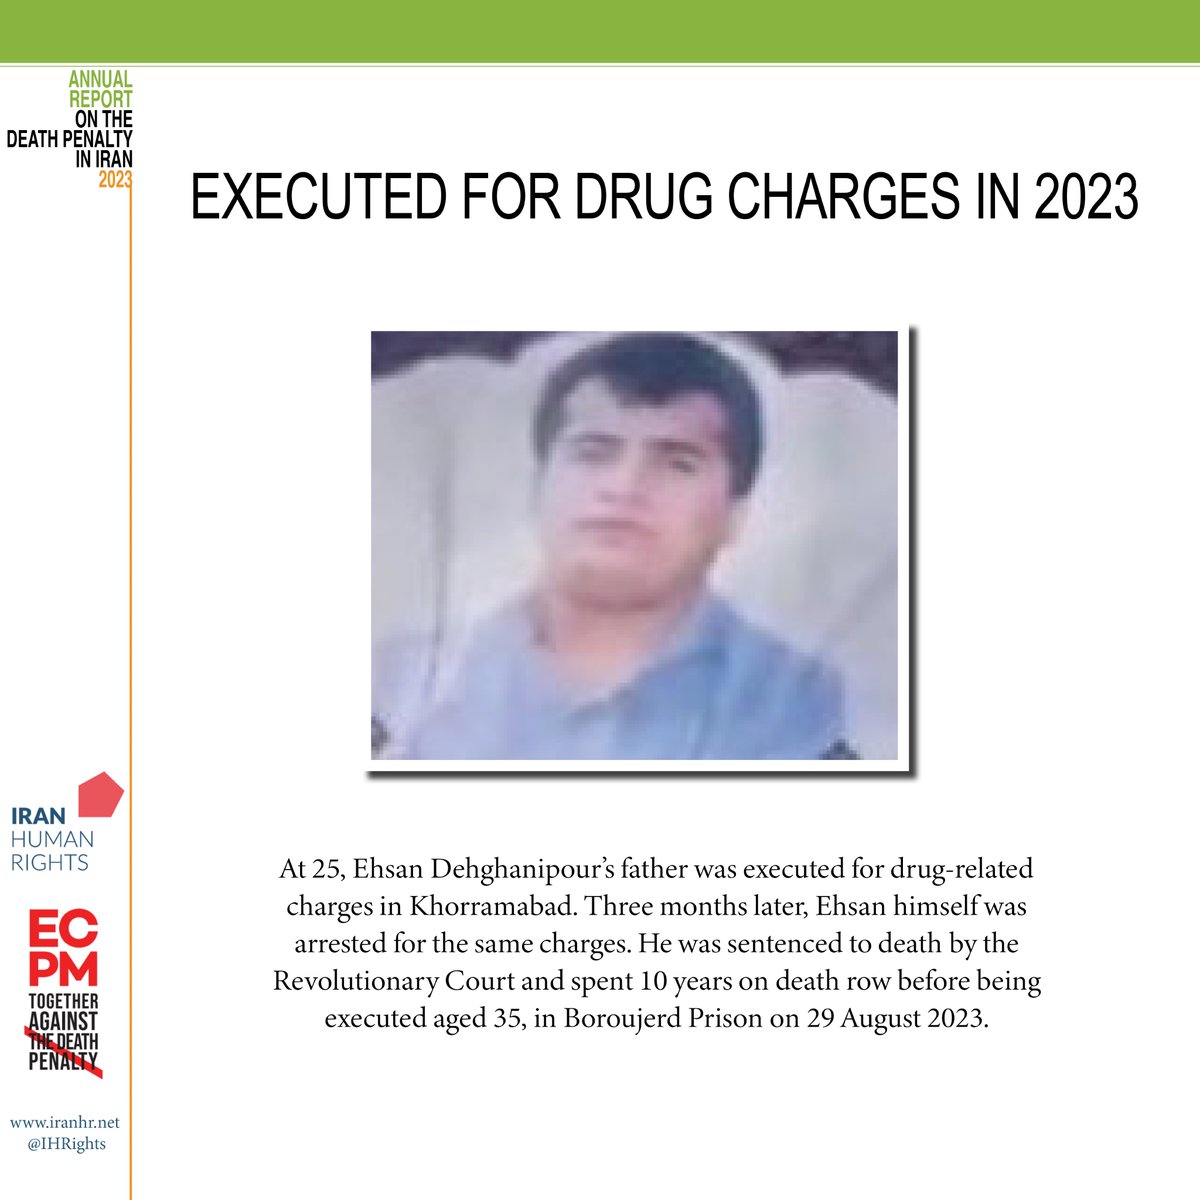 The execution of family members have been documented in drug-related cases more than any other charges in recent years. Ehsan Dehghanipour's father was executed a decade before his own execution in August 2023. #StopExecutionsInIran #NoDeathPenalty